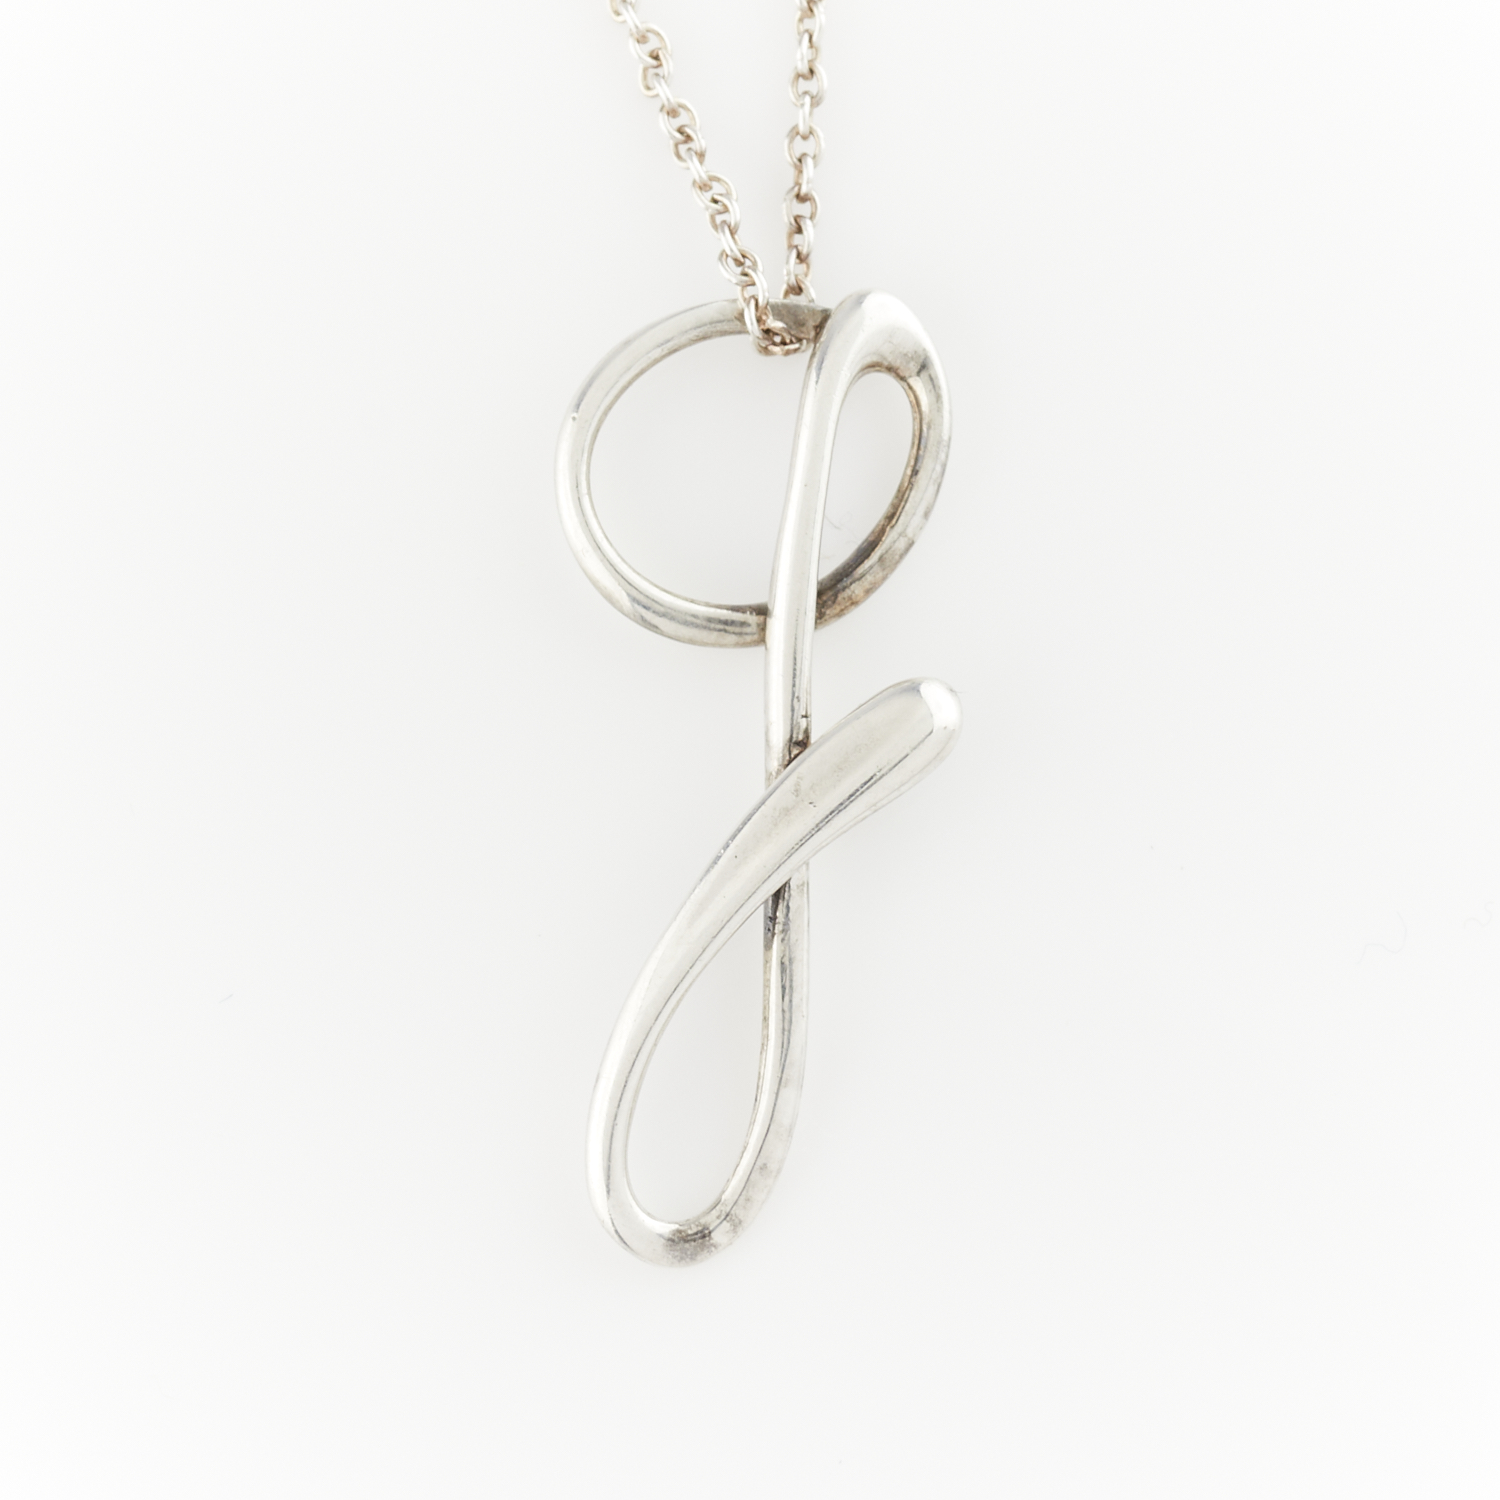 Elsa Peretti for Tiffany & Co. Sterling Initial Necklace - Image 5 of 8